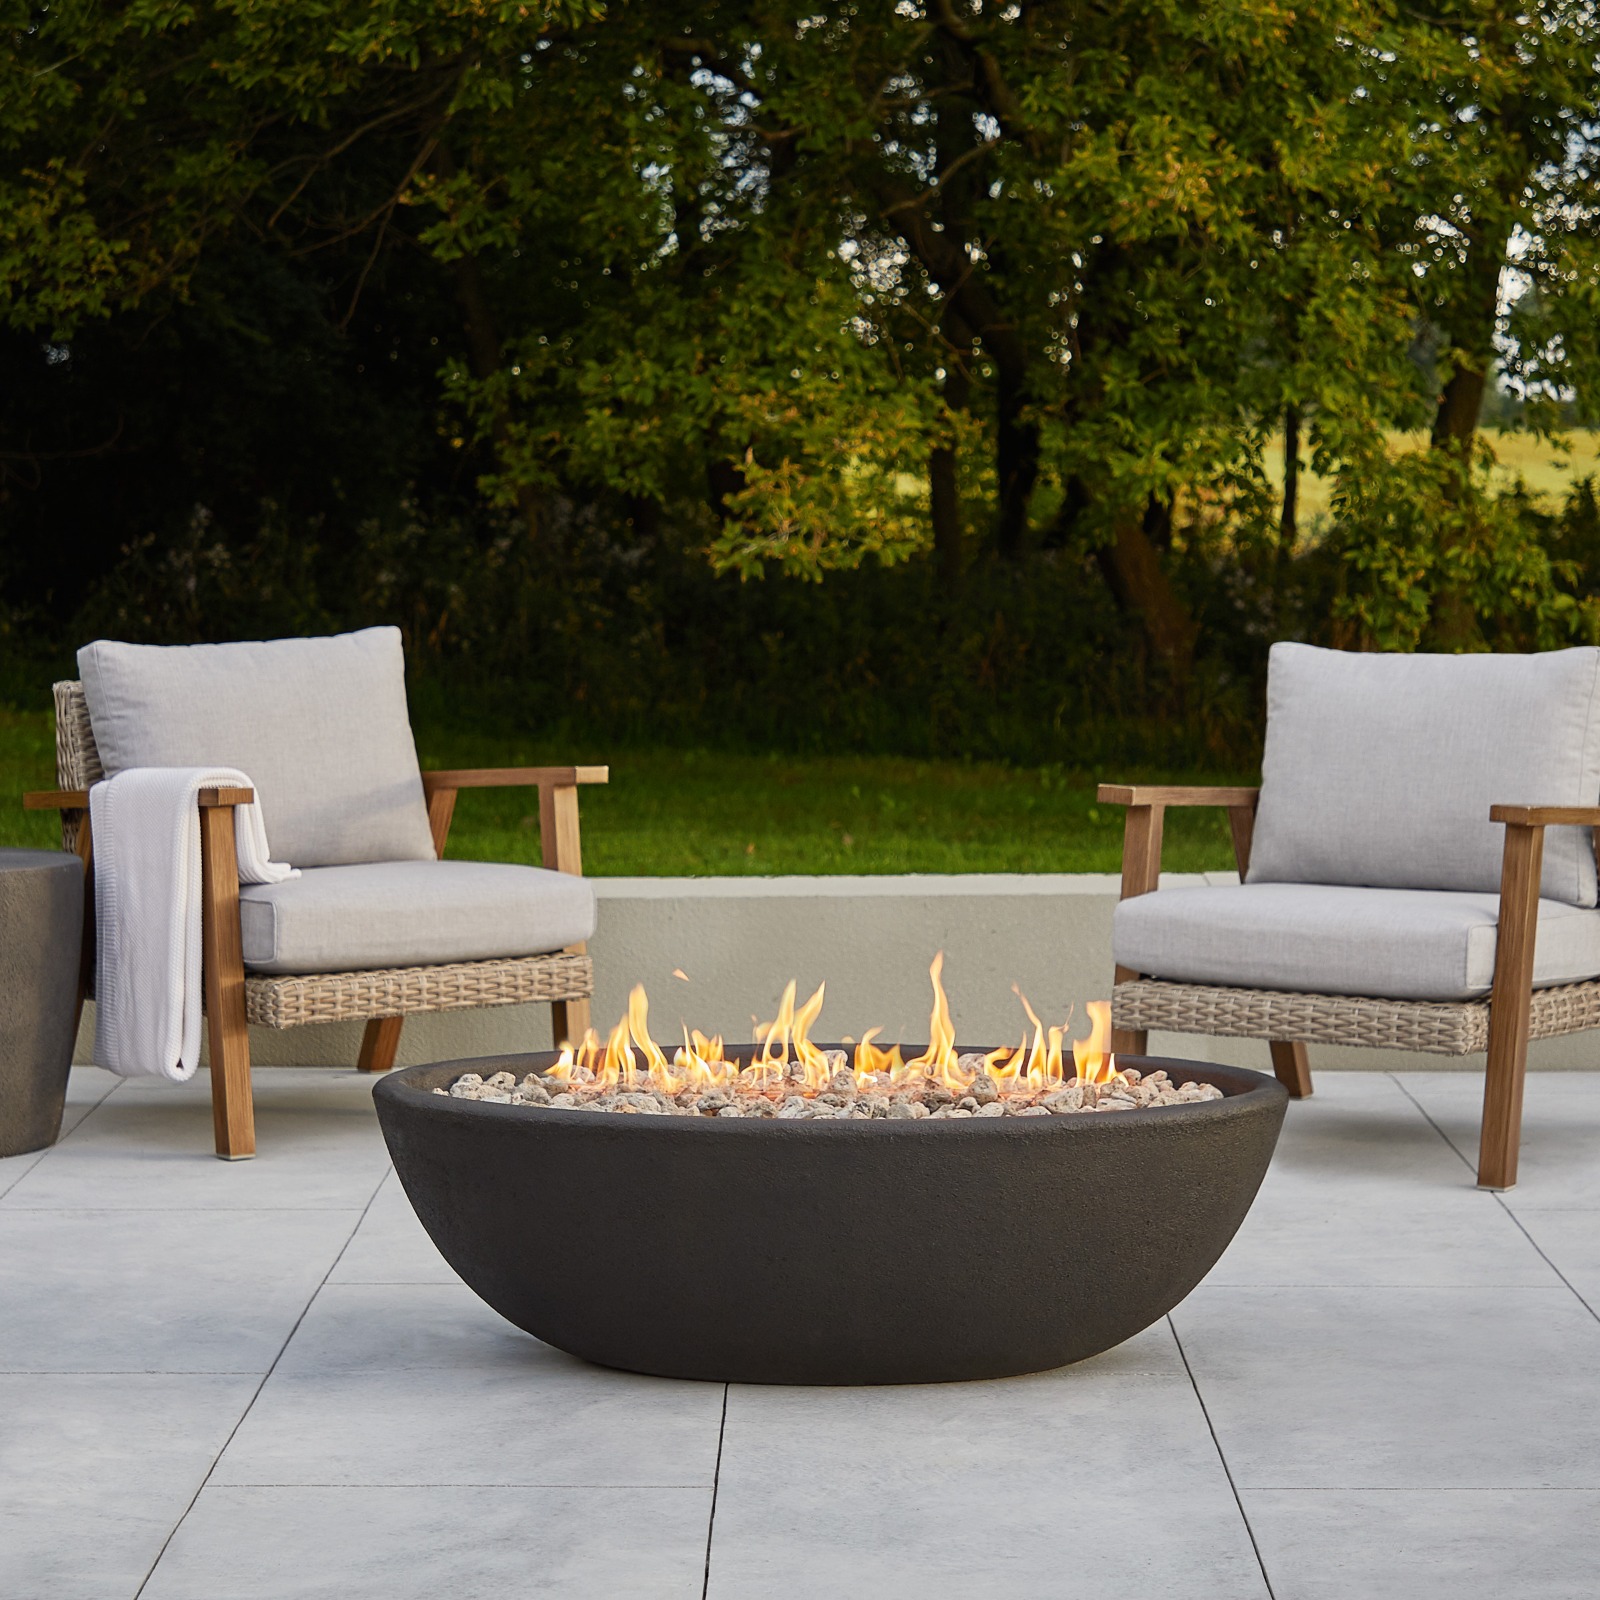 Riverside Oval Propane Fire Pit Fire Bowl Outdoor Fireplace Fire Table for Backyard or Patio